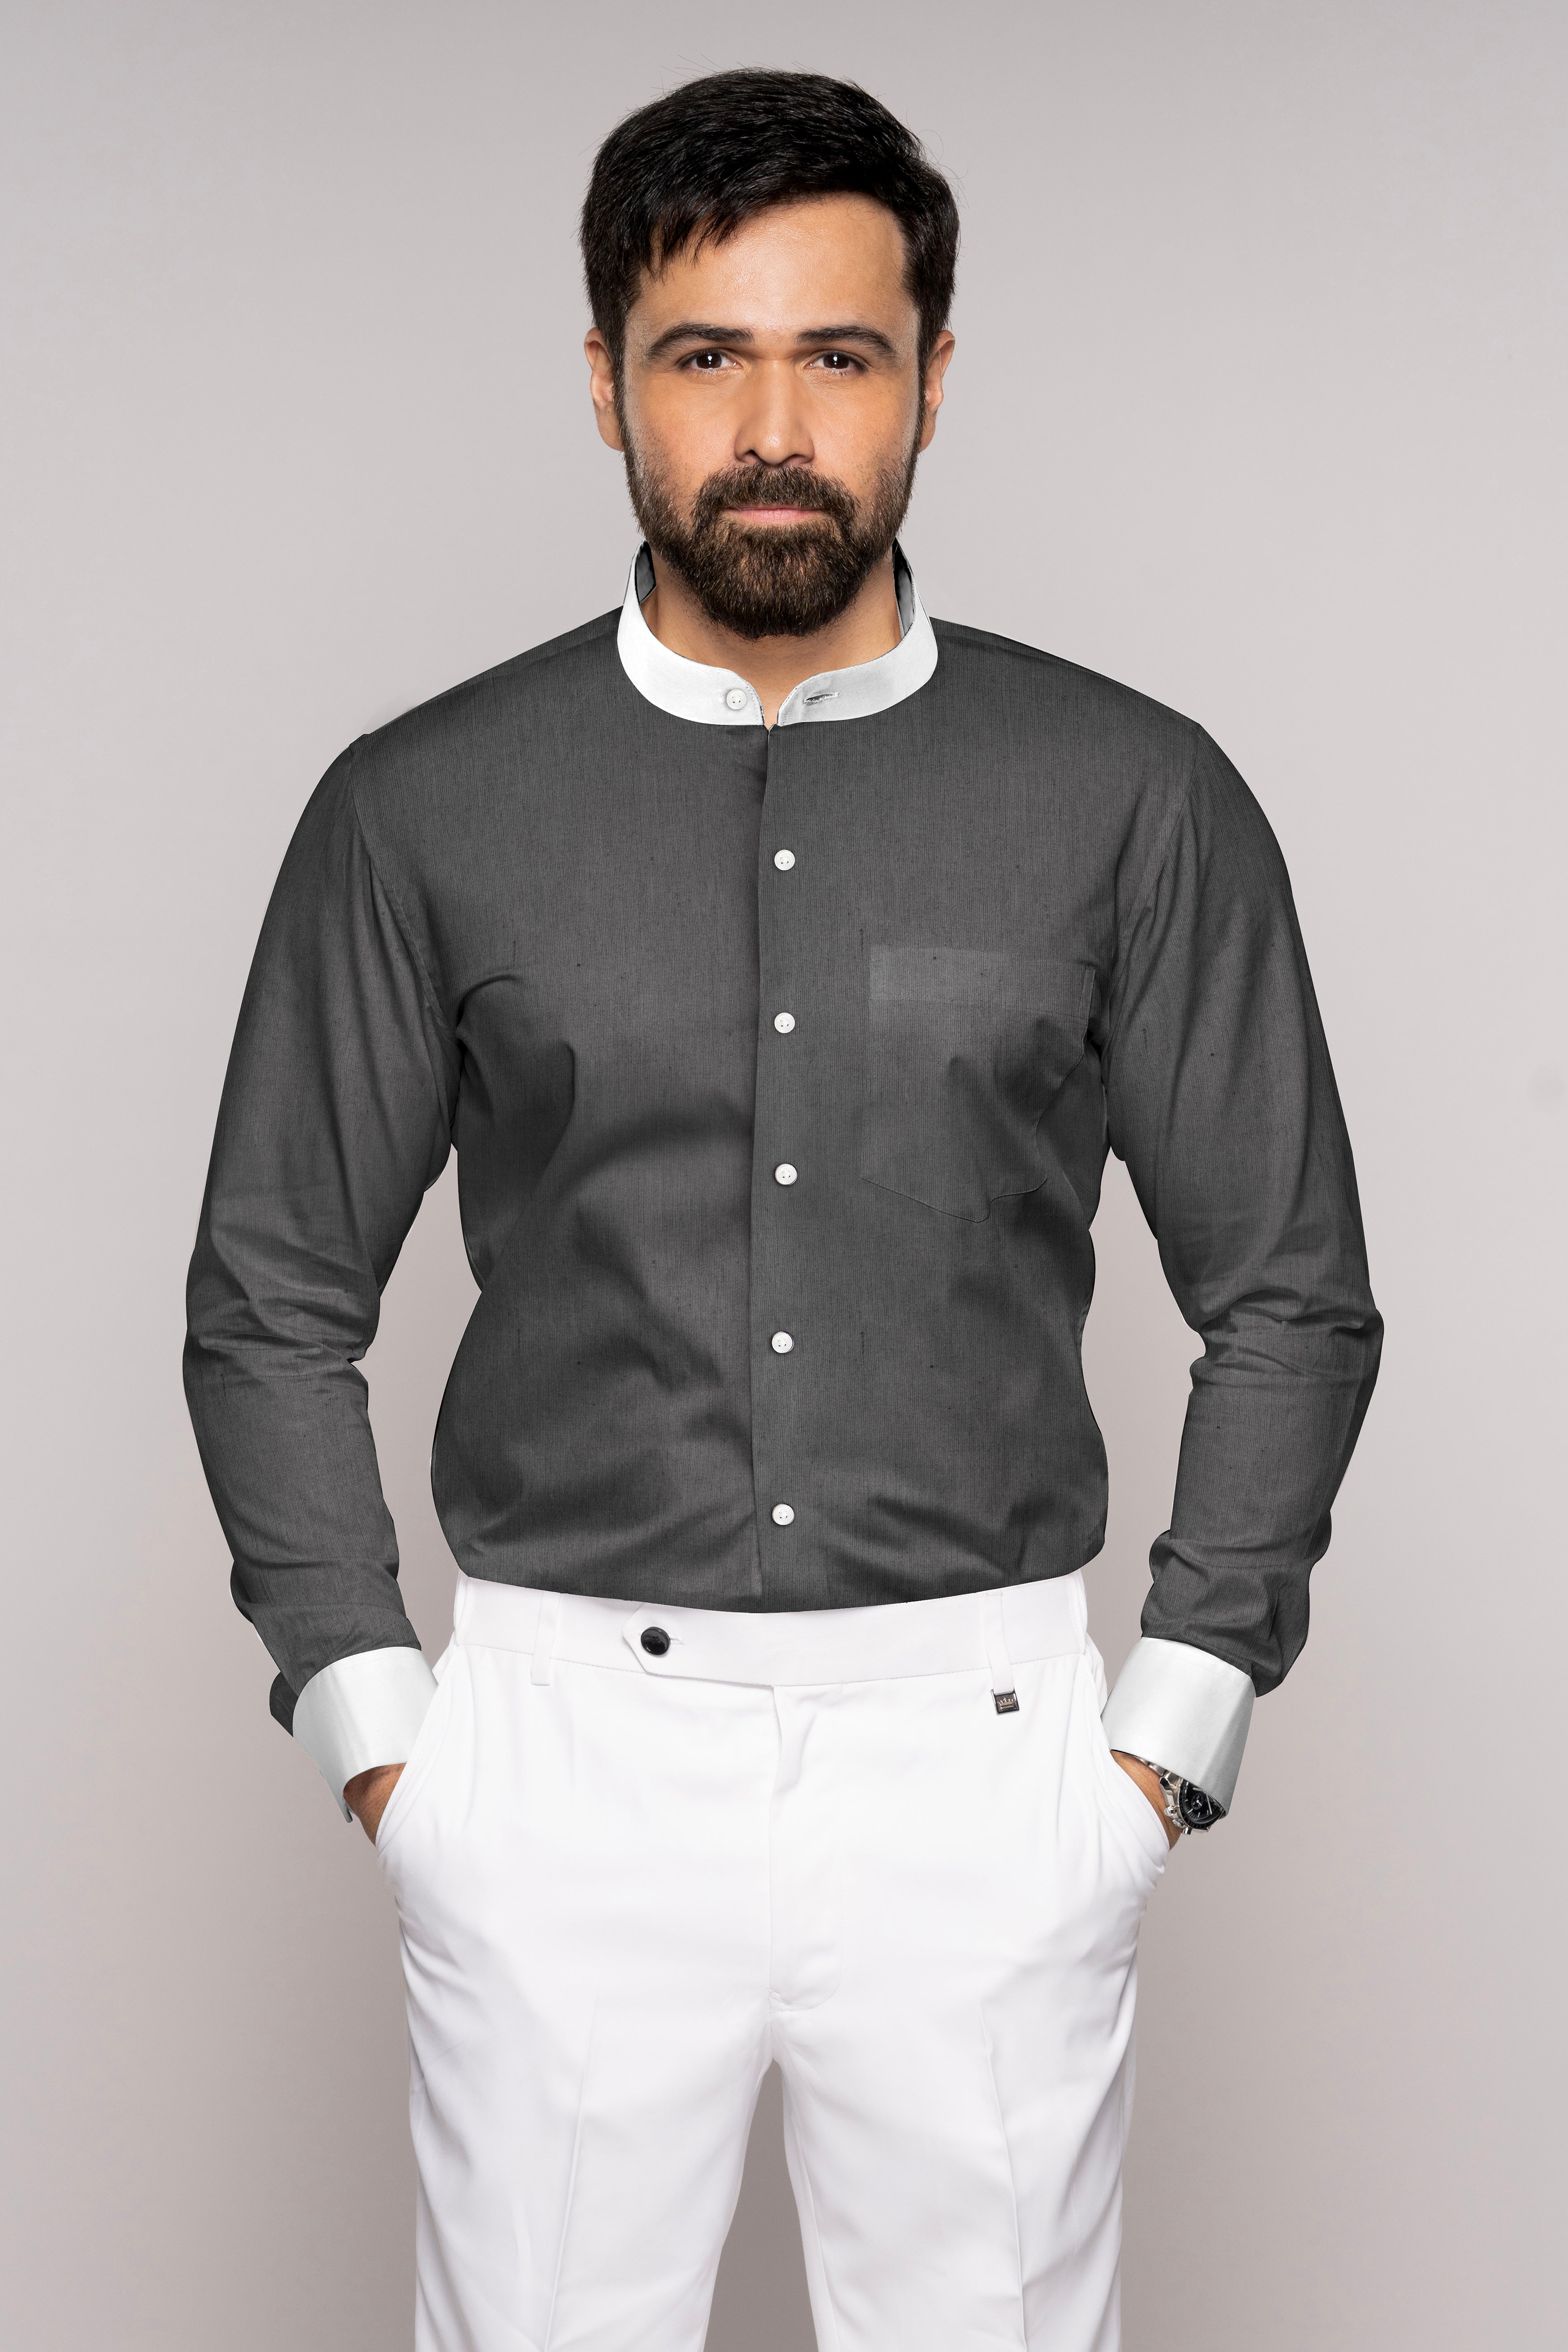 Zeus Gray with White Cuffs and Collar Luxurious Linen Shirt